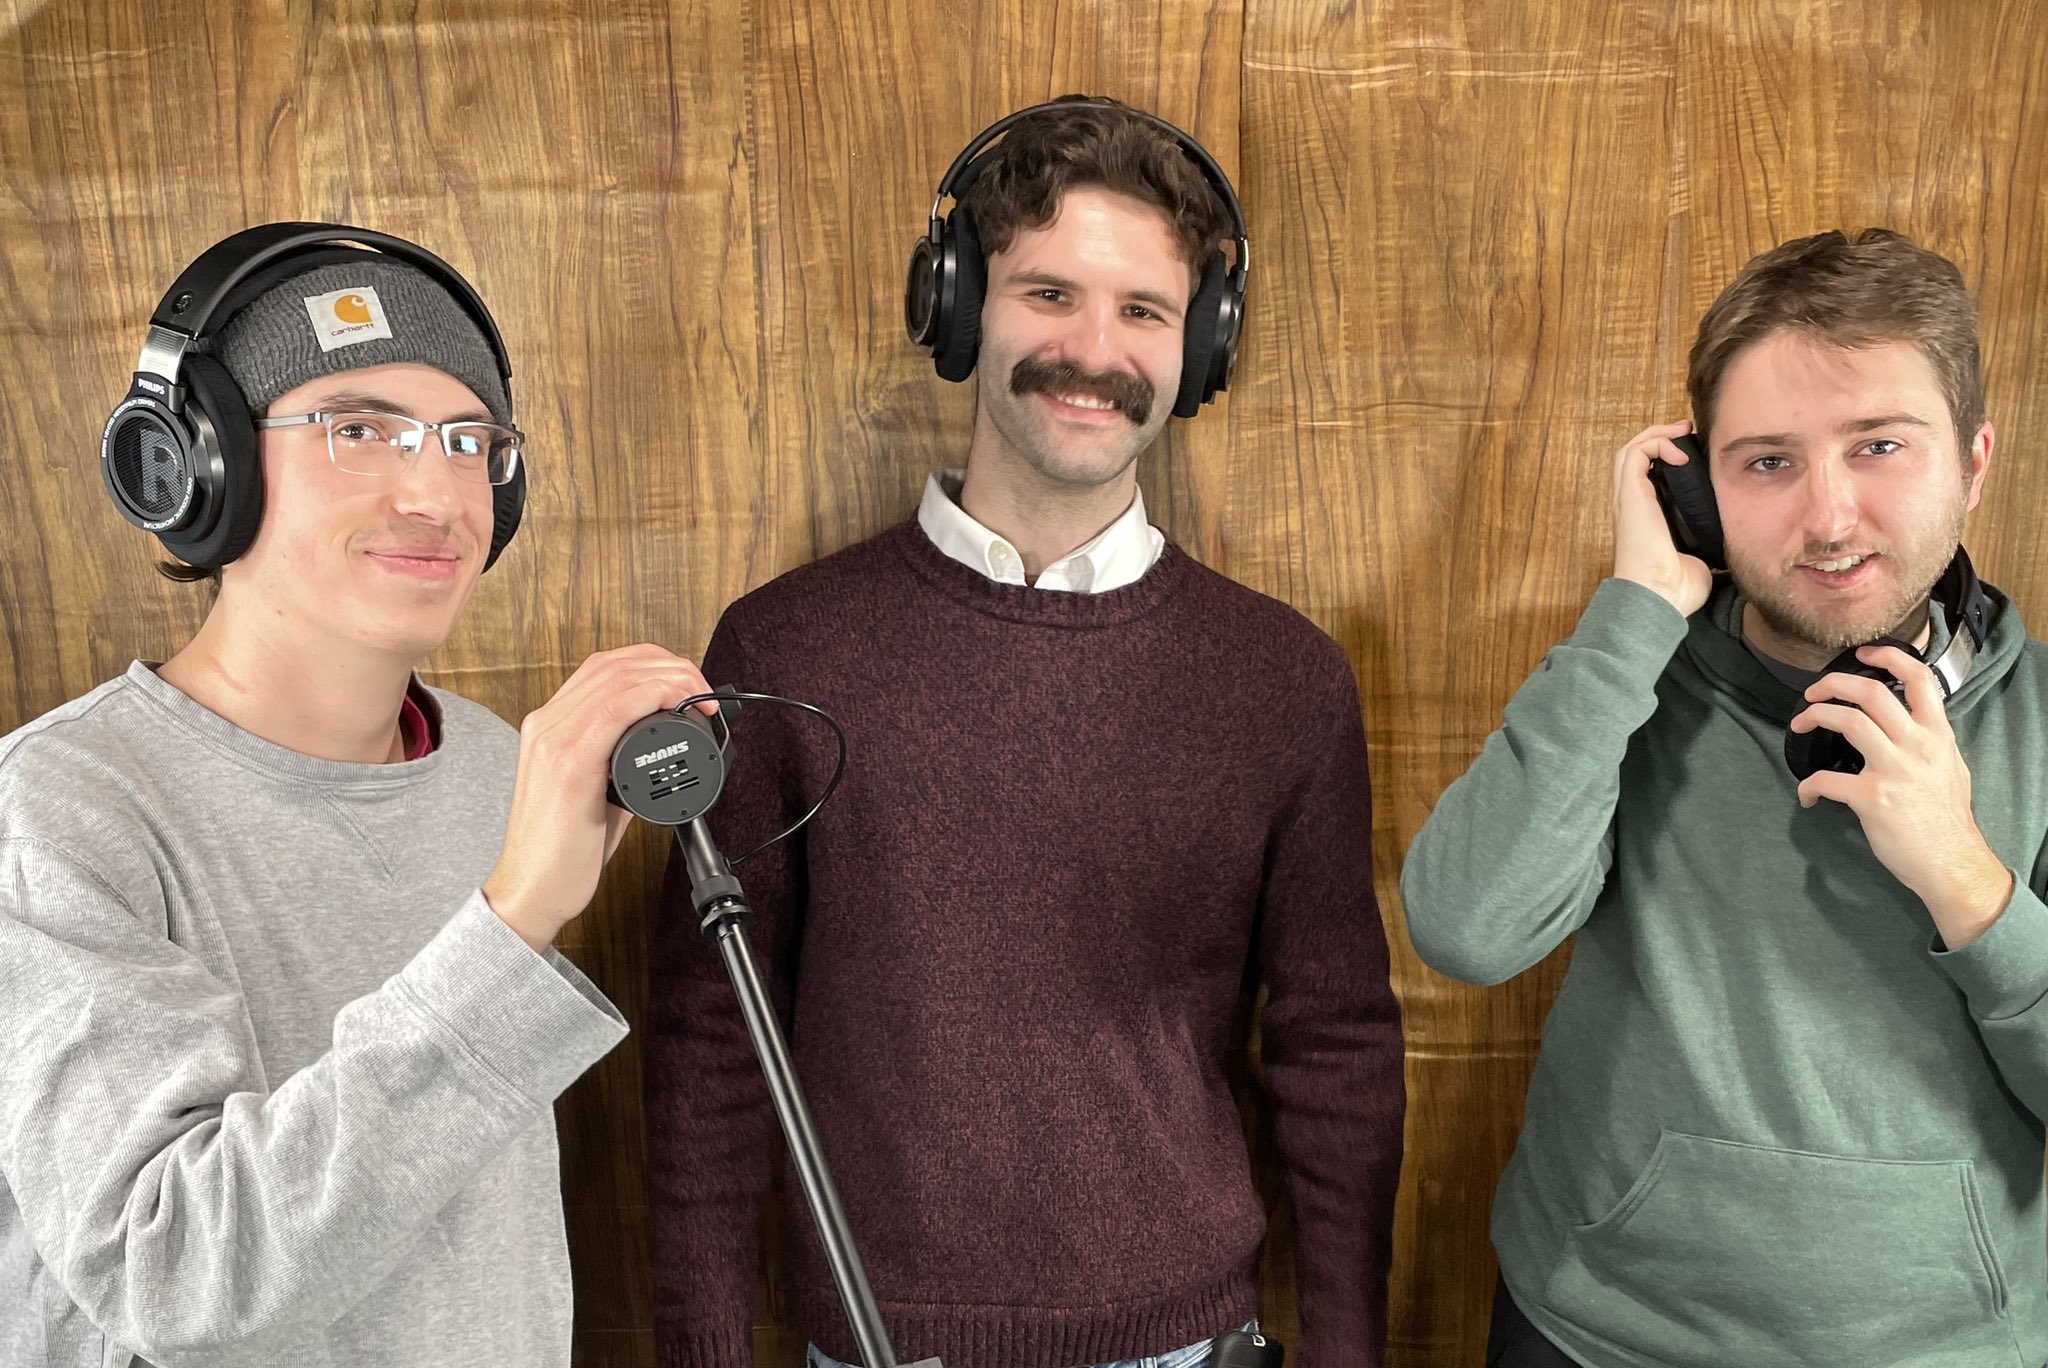 Joe, Justin, and Sam stand against a wall covered in wood-print contact paper. Joe wears a beanie and gray sweatshirt, Sam wears a green hoodie, and Justin wears his Jerry Attricks costume. Joe and Sam wear/hold headphones, and a microphone on an arm is next to Joe. They appear to be recording something.